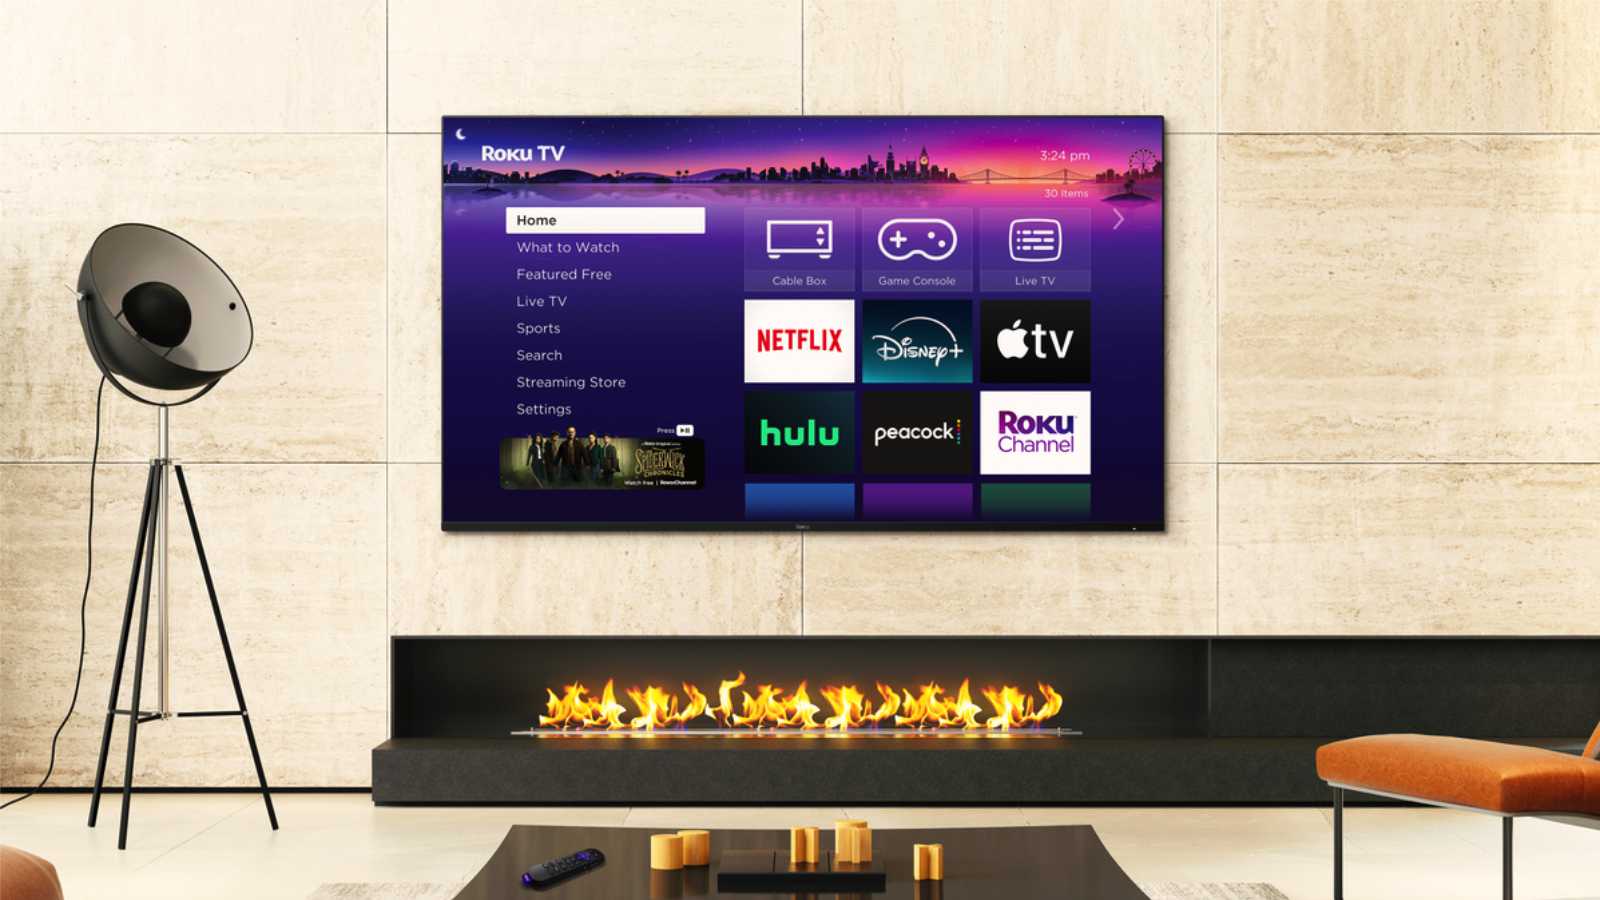 The roku pro series tv sports a mini-led screen with qled technology and side-firing speakers for enhanced audio fidelity. Image: roku